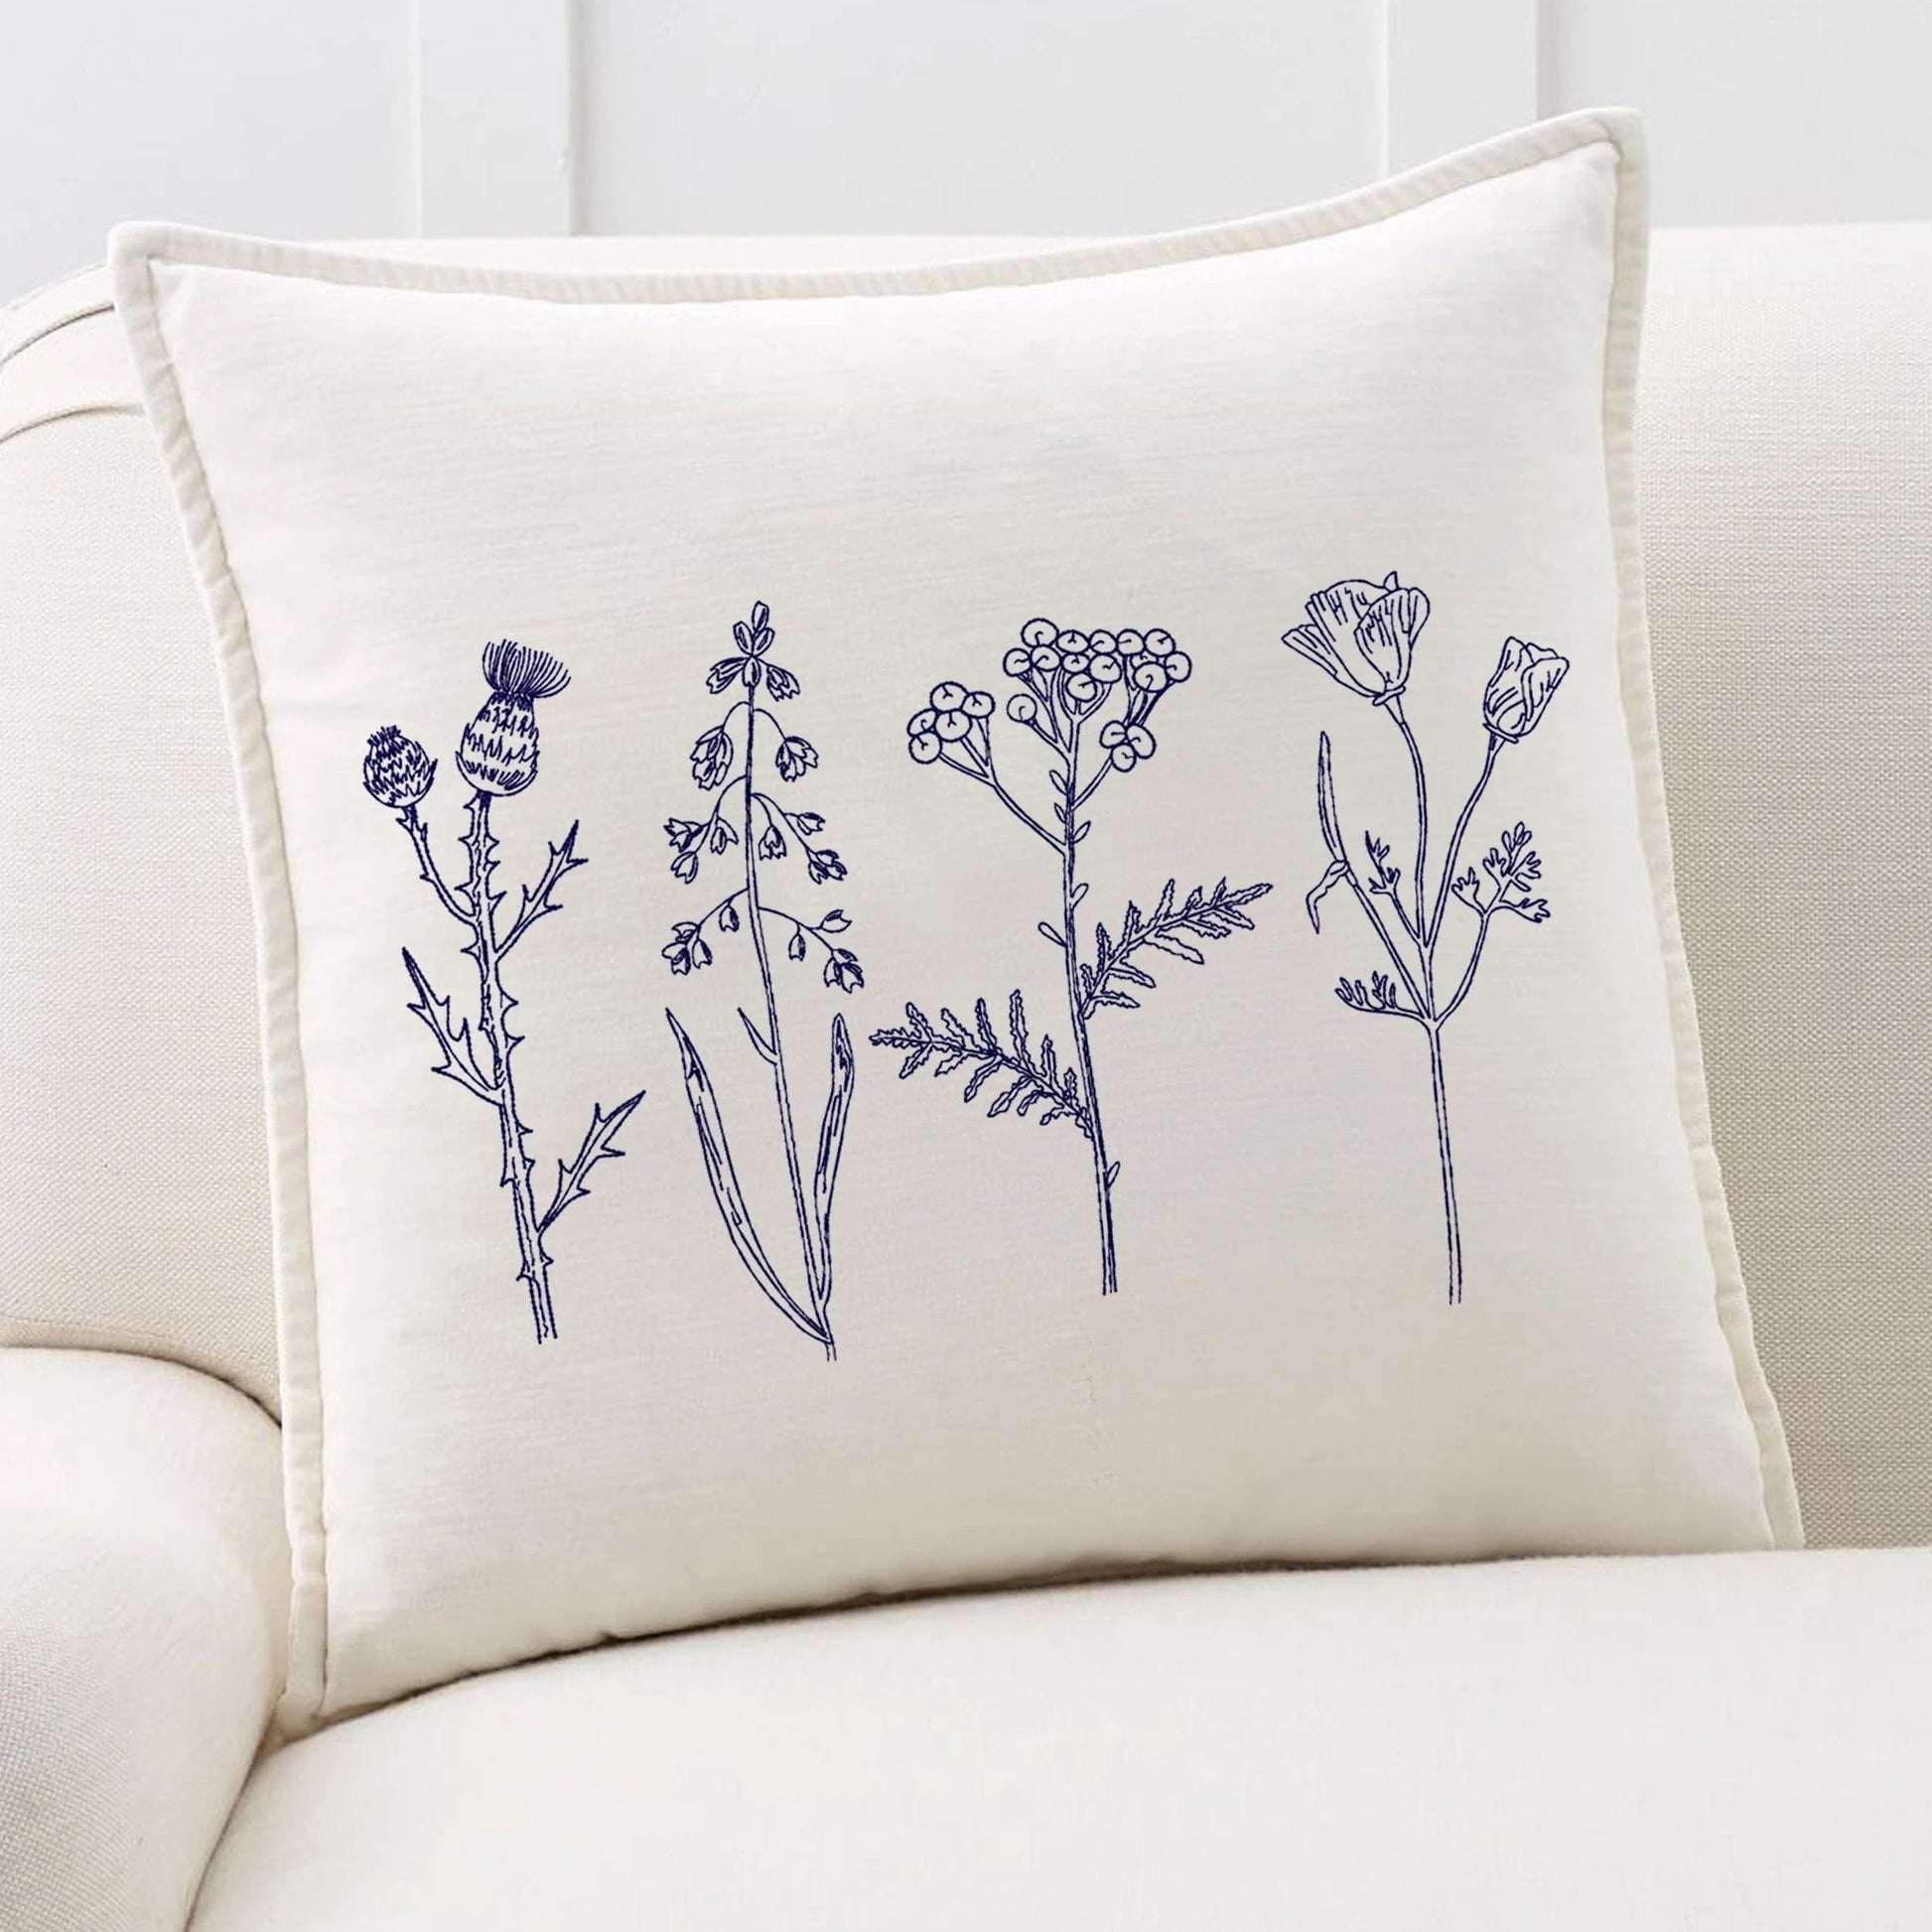 Chinoiserie Meadow Flowers Machine Embroidery Design on pillow